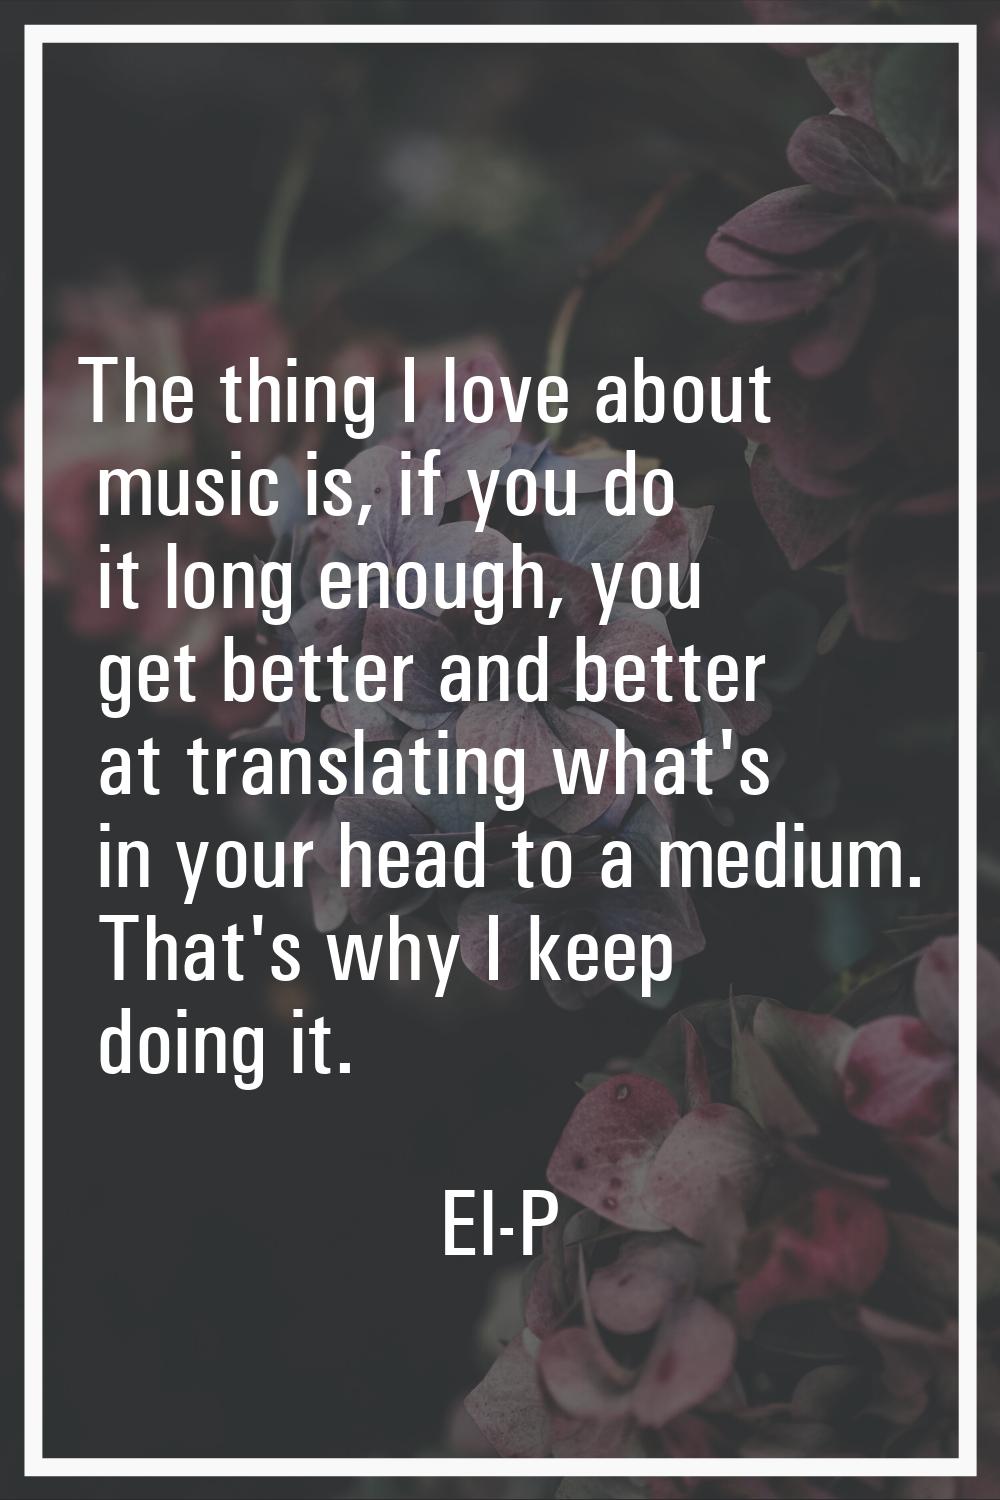 The thing I love about music is, if you do it long enough, you get better and better at translating